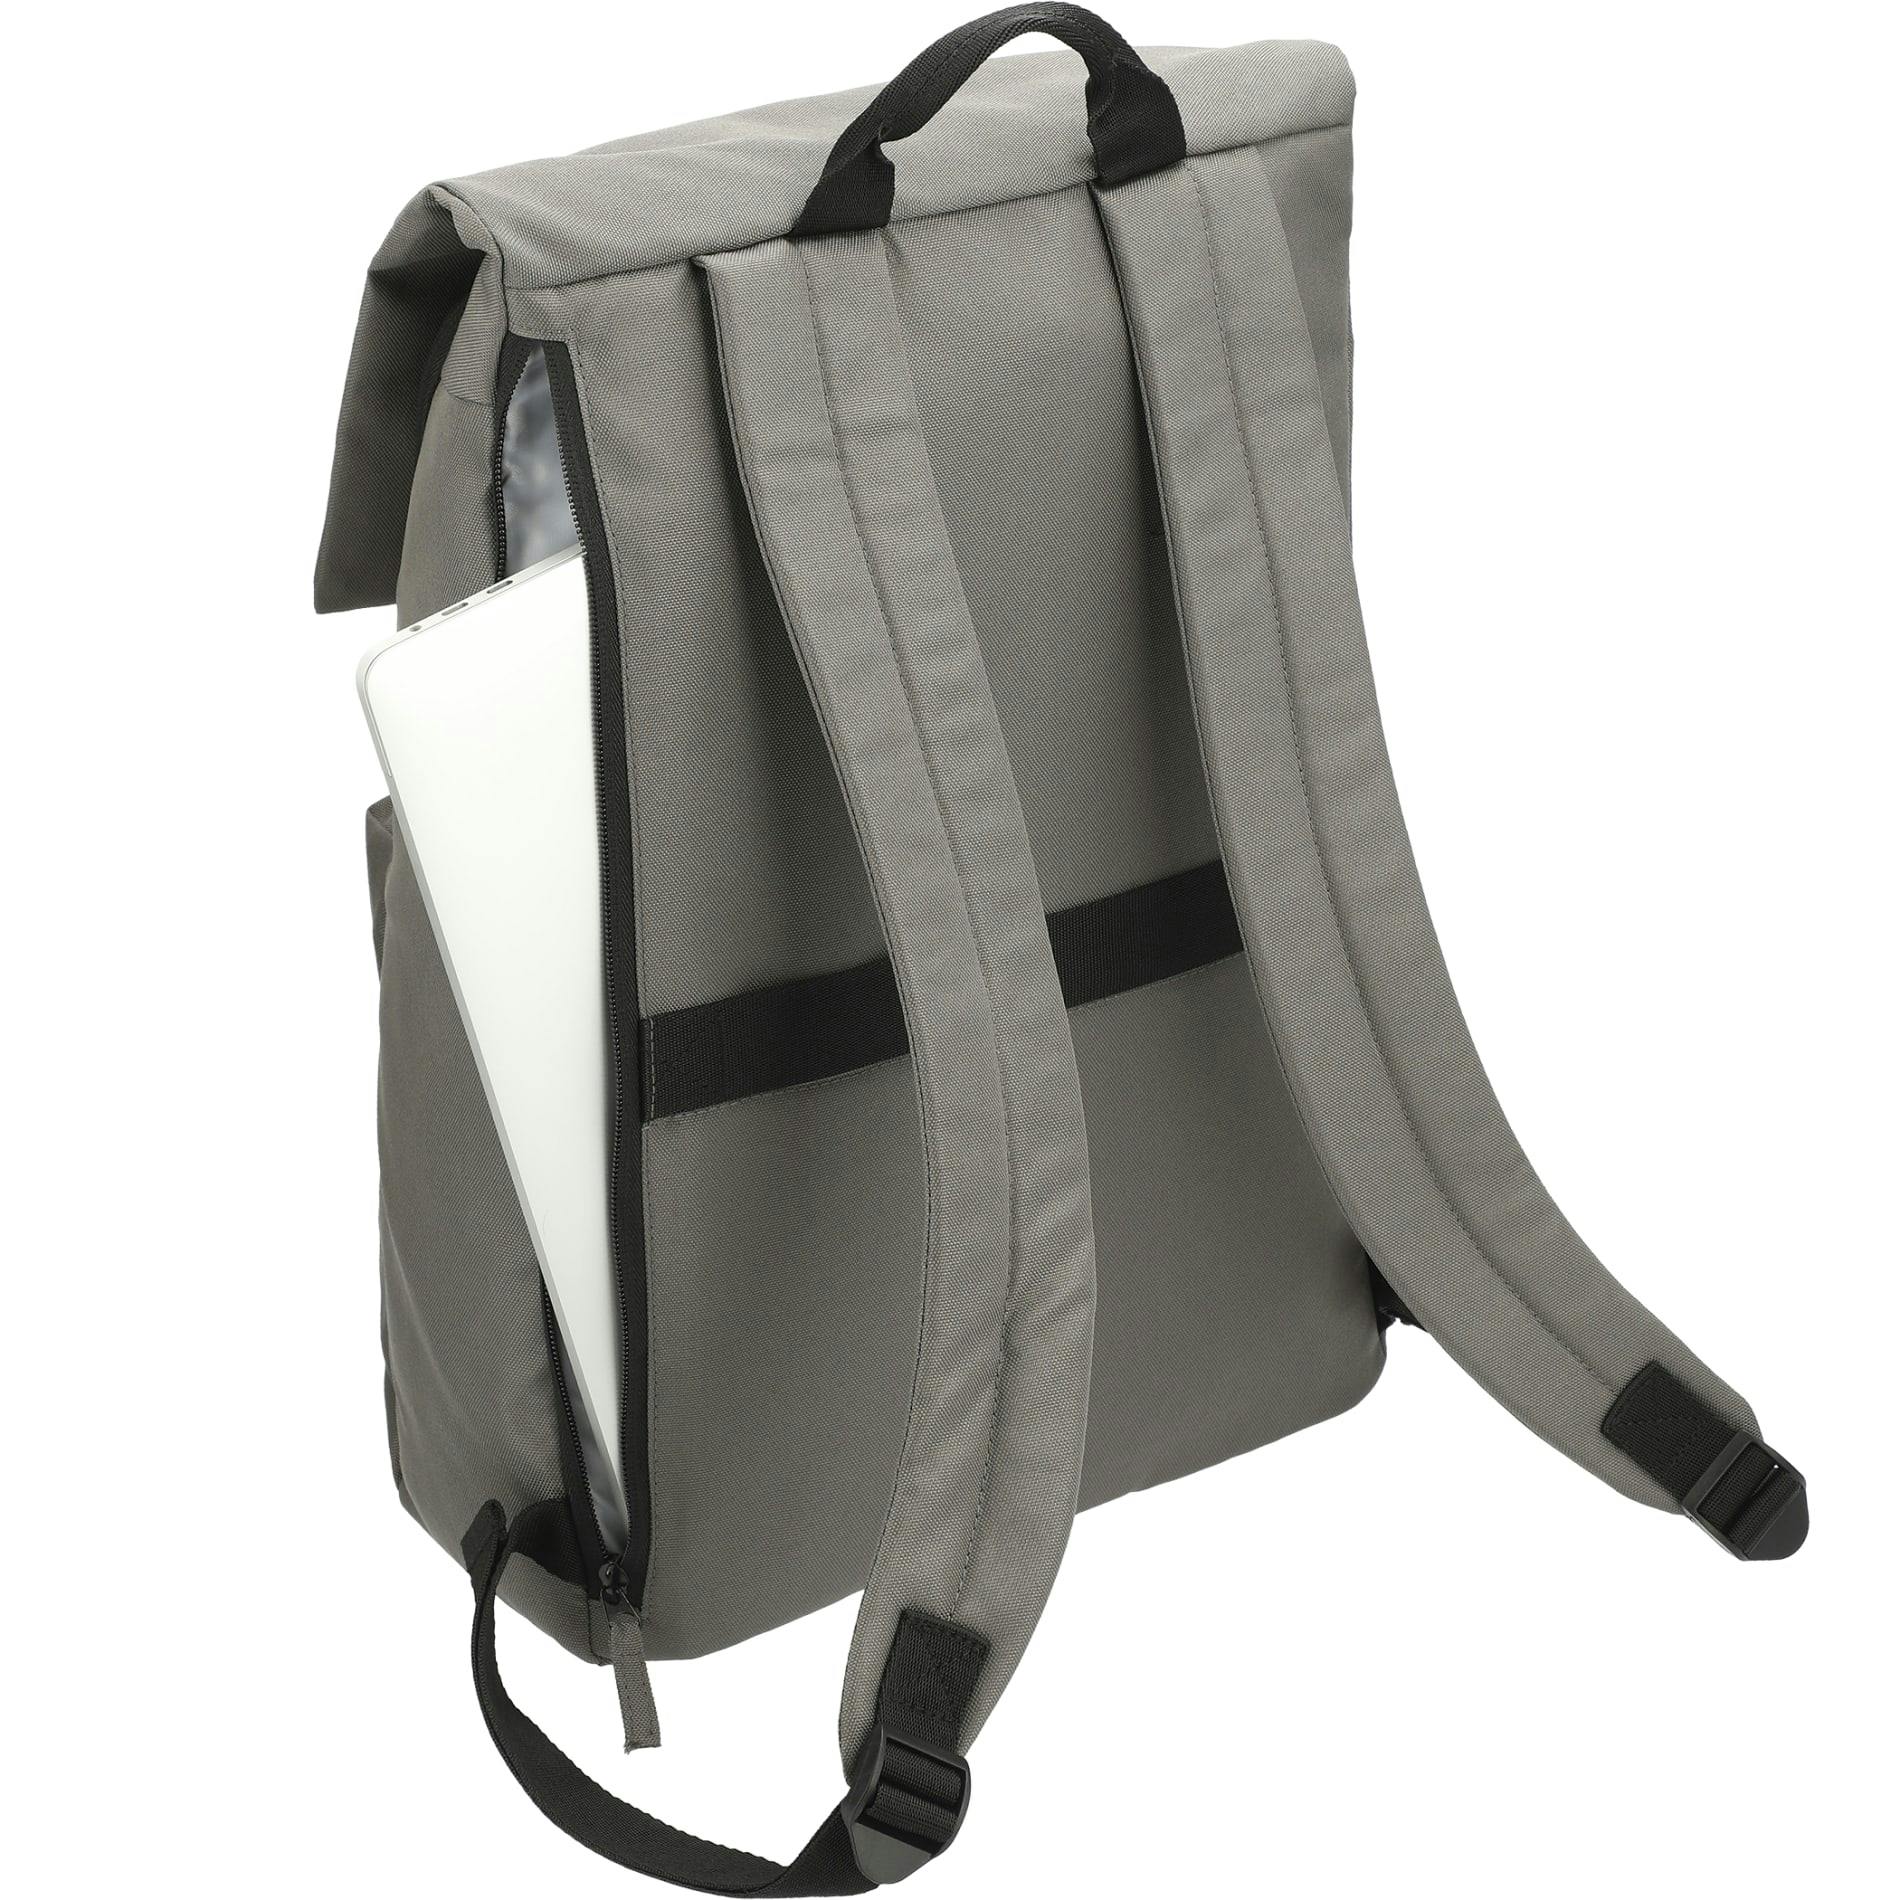 Merritt Recycled 15" Computer Backpack - additional Image 4